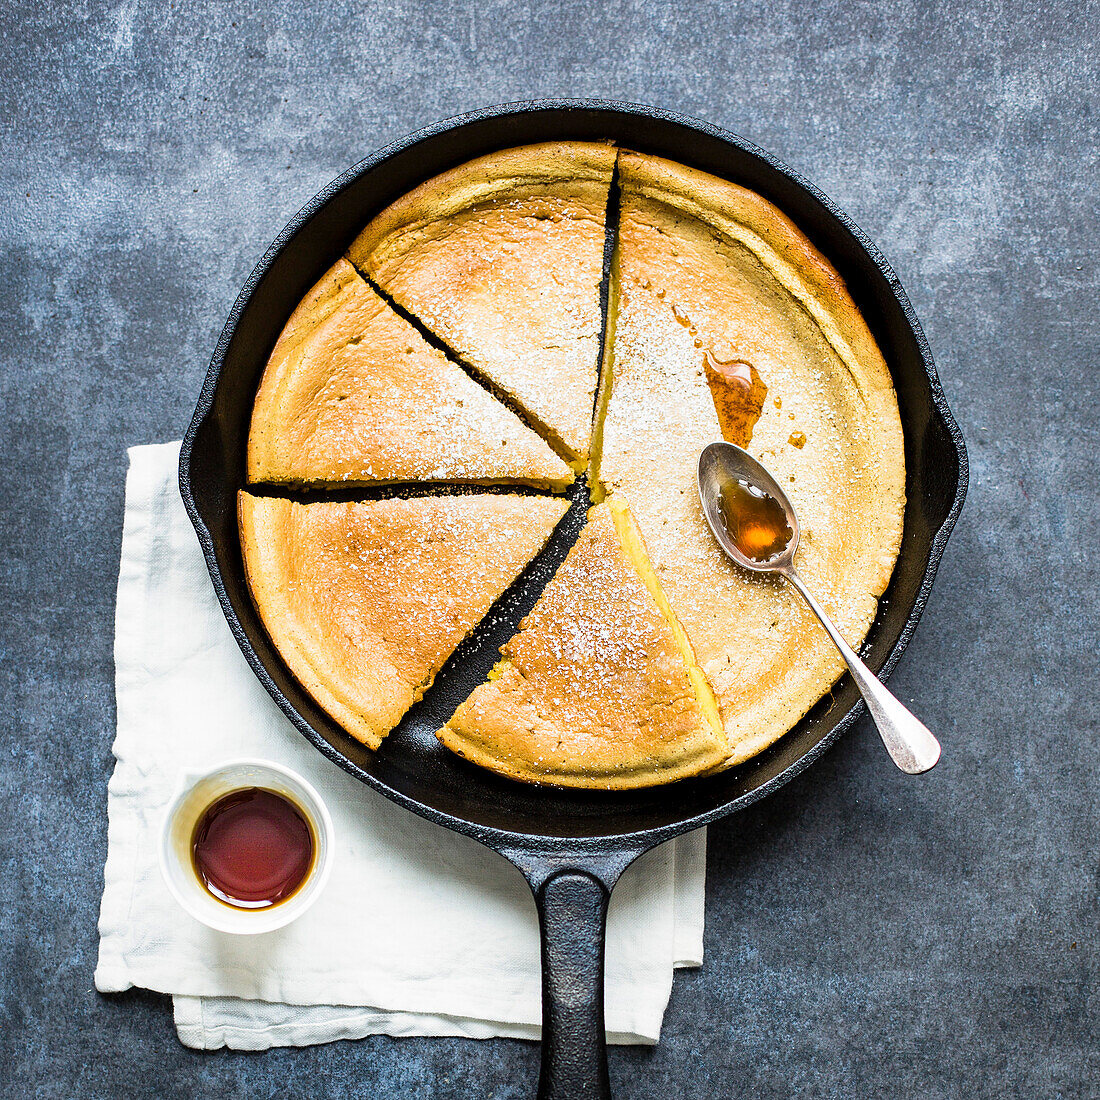 Baked pancake in a cast iron pan